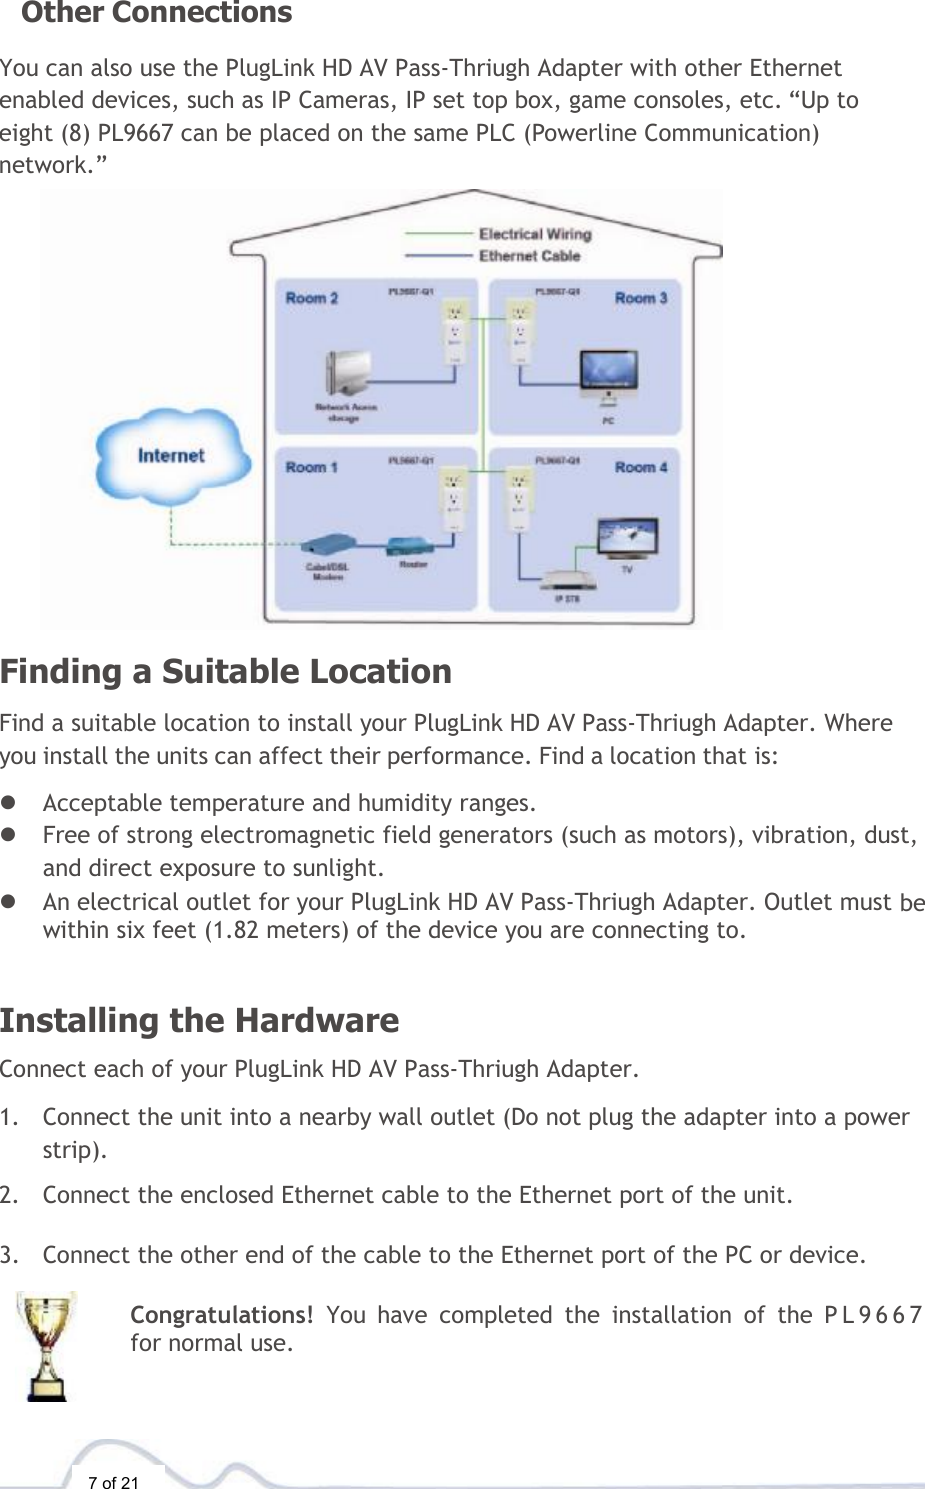  7 of 21  Other Connections  You can also use the PlugLink HD AV Pass-Thriugh Adapter with other Ethernet enabled devices, such as IP Cameras, IP set top box, game consoles, etc. “Up to eight (8) PL9667 can be placed on the same PLC (Powerline Communication) network.”  Finding a Suitable Location  Find a suitable location to install your PlugLink HD AV Pass-Thriugh Adapter. Where you install the units can affect their performance. Find a location that is:  l Acceptable temperature and humidity ranges. l Free of strong electromagnetic field generators (such as motors), vibration, dust, and direct exposure to sunlight. l An electrical outlet for your PlugLink HD AV Pass-Thriugh Adapter. Outlet must be within six feet (1.82 meters) of the device you are connecting to.   Installing the Hardware  Connect each of your PlugLink HD AV Pass-Thriugh Adapter.  1. Connect the unit into a nearby wall outlet (Do not plug the adapter into a power strip).  2. Connect the enclosed Ethernet cable to the Ethernet port of the unit.   3. Connect the other end of the cable to the Ethernet port of the PC or device.  Congratulations!  You have completed the installation of the PL9667 for normal use.   